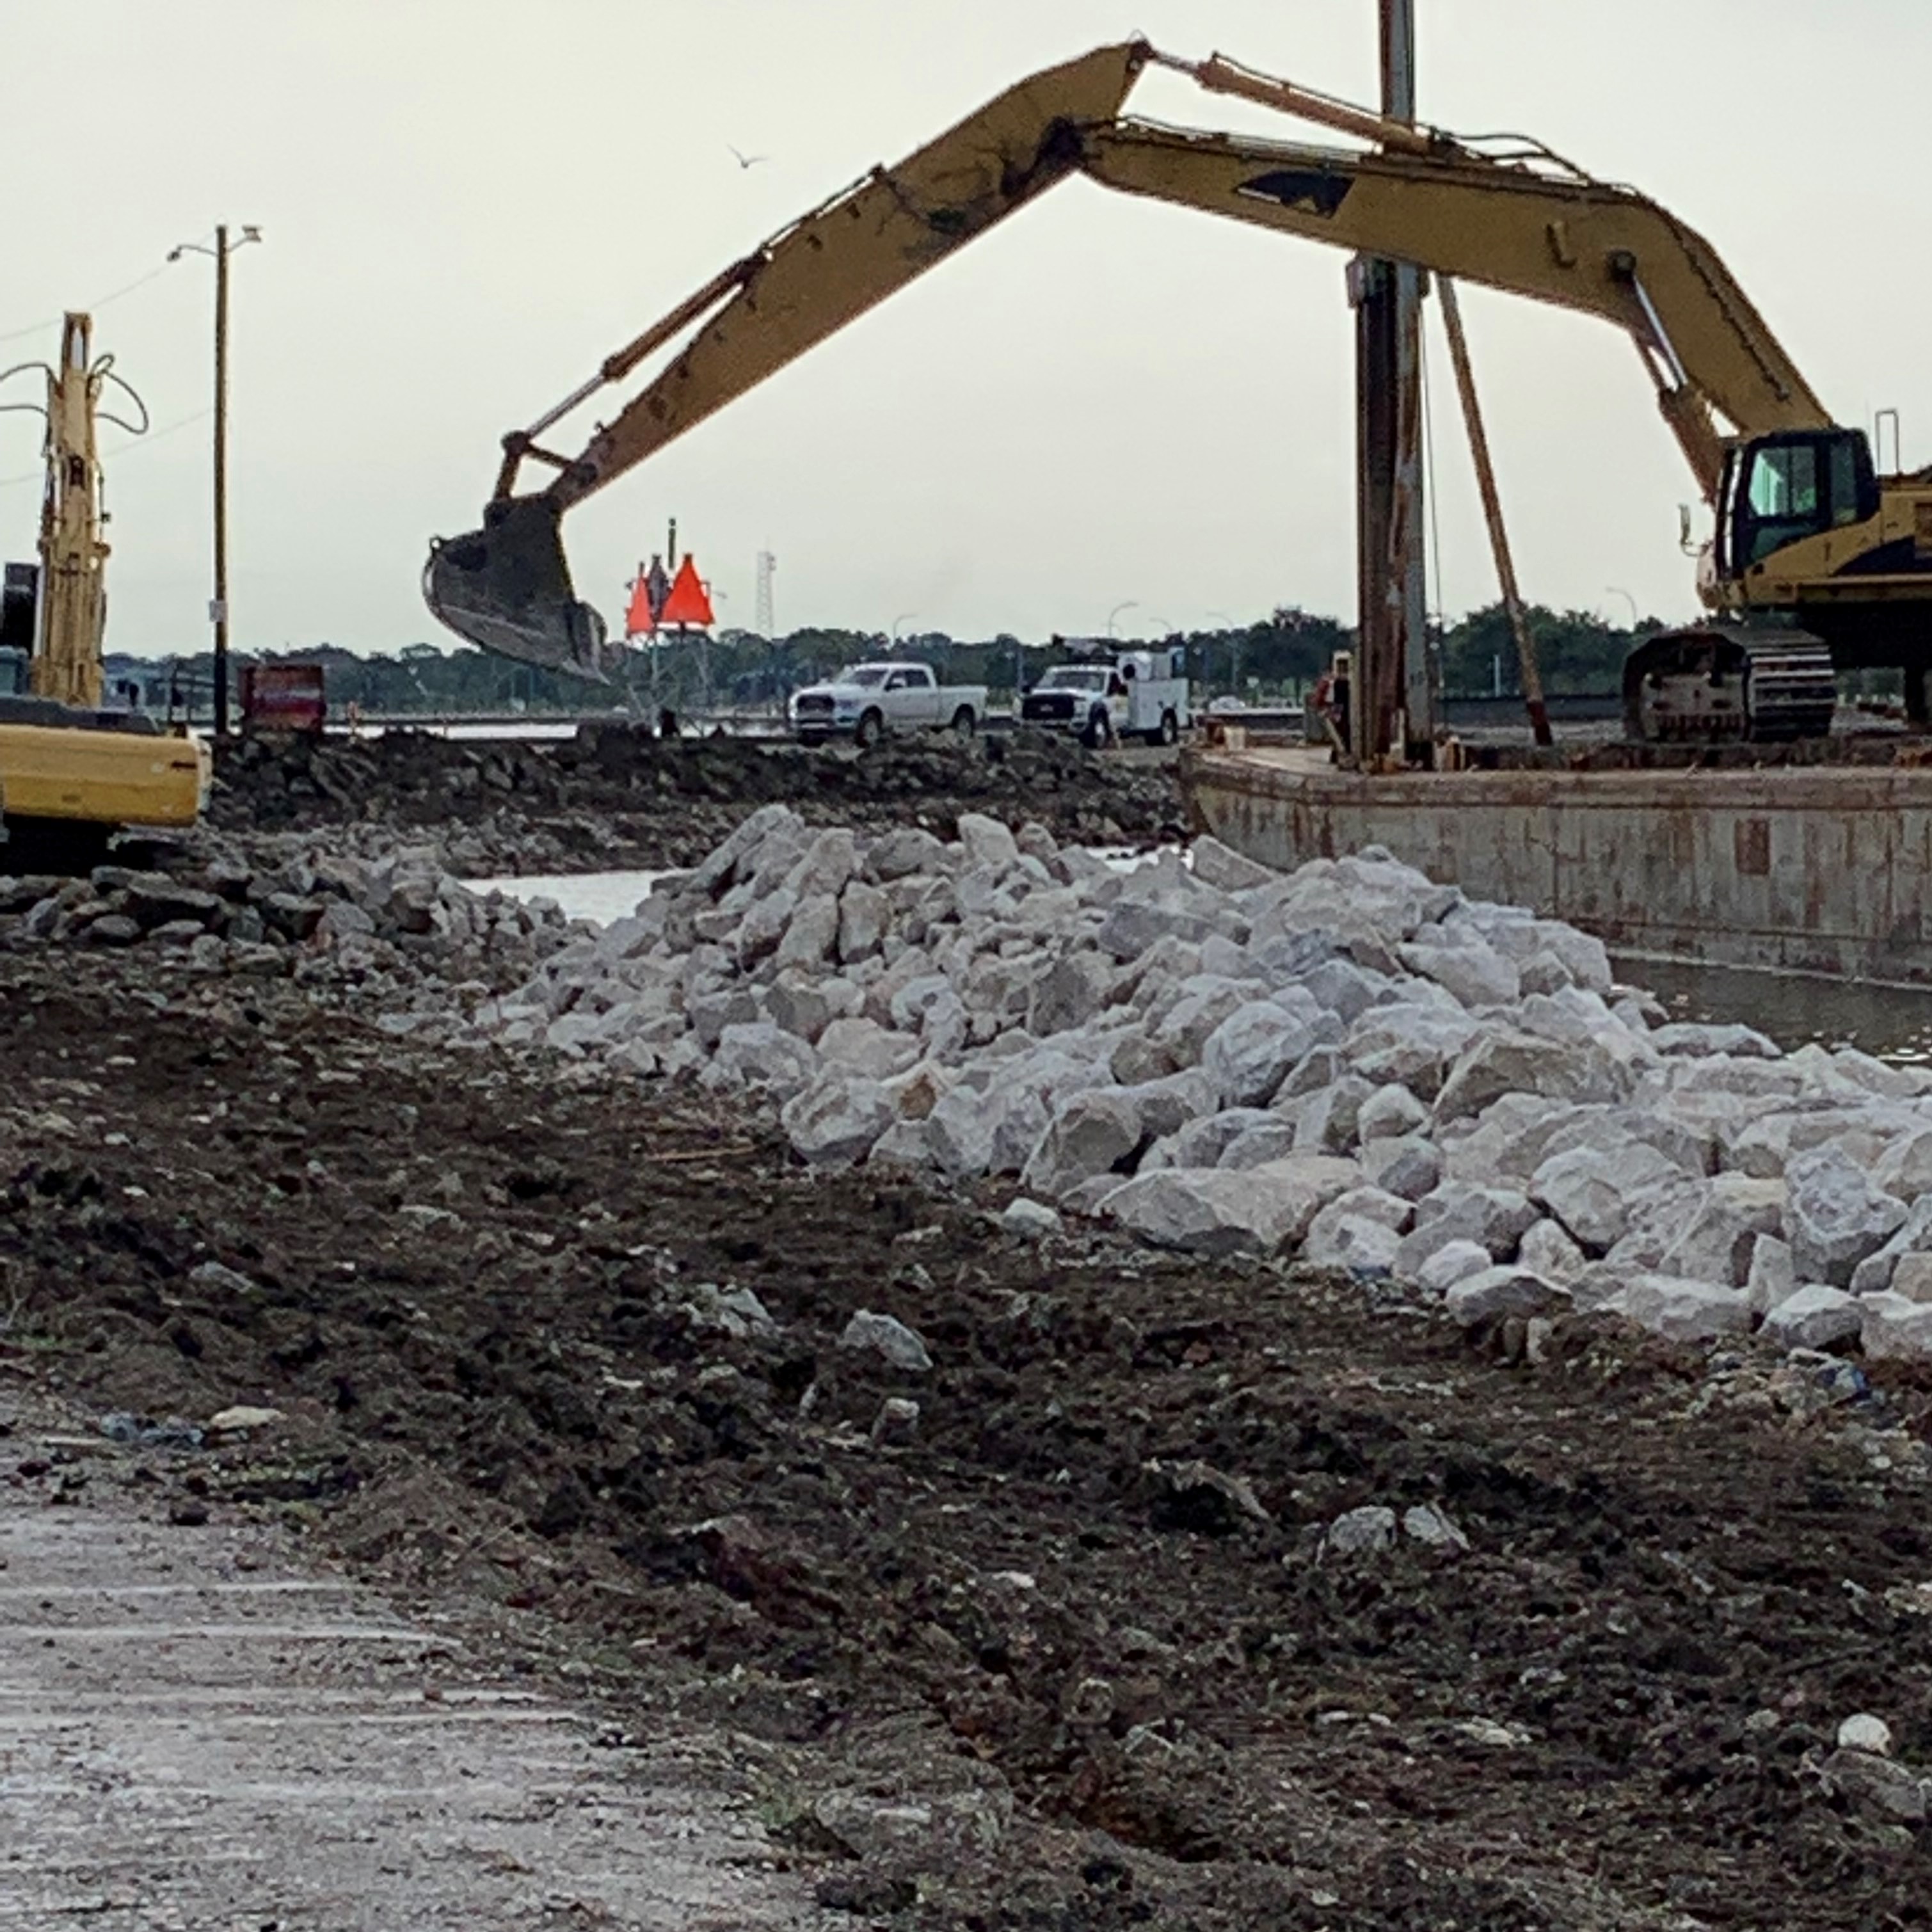 BREAKWATER DRIVE PROJECT ON TEMPORARY HOLD